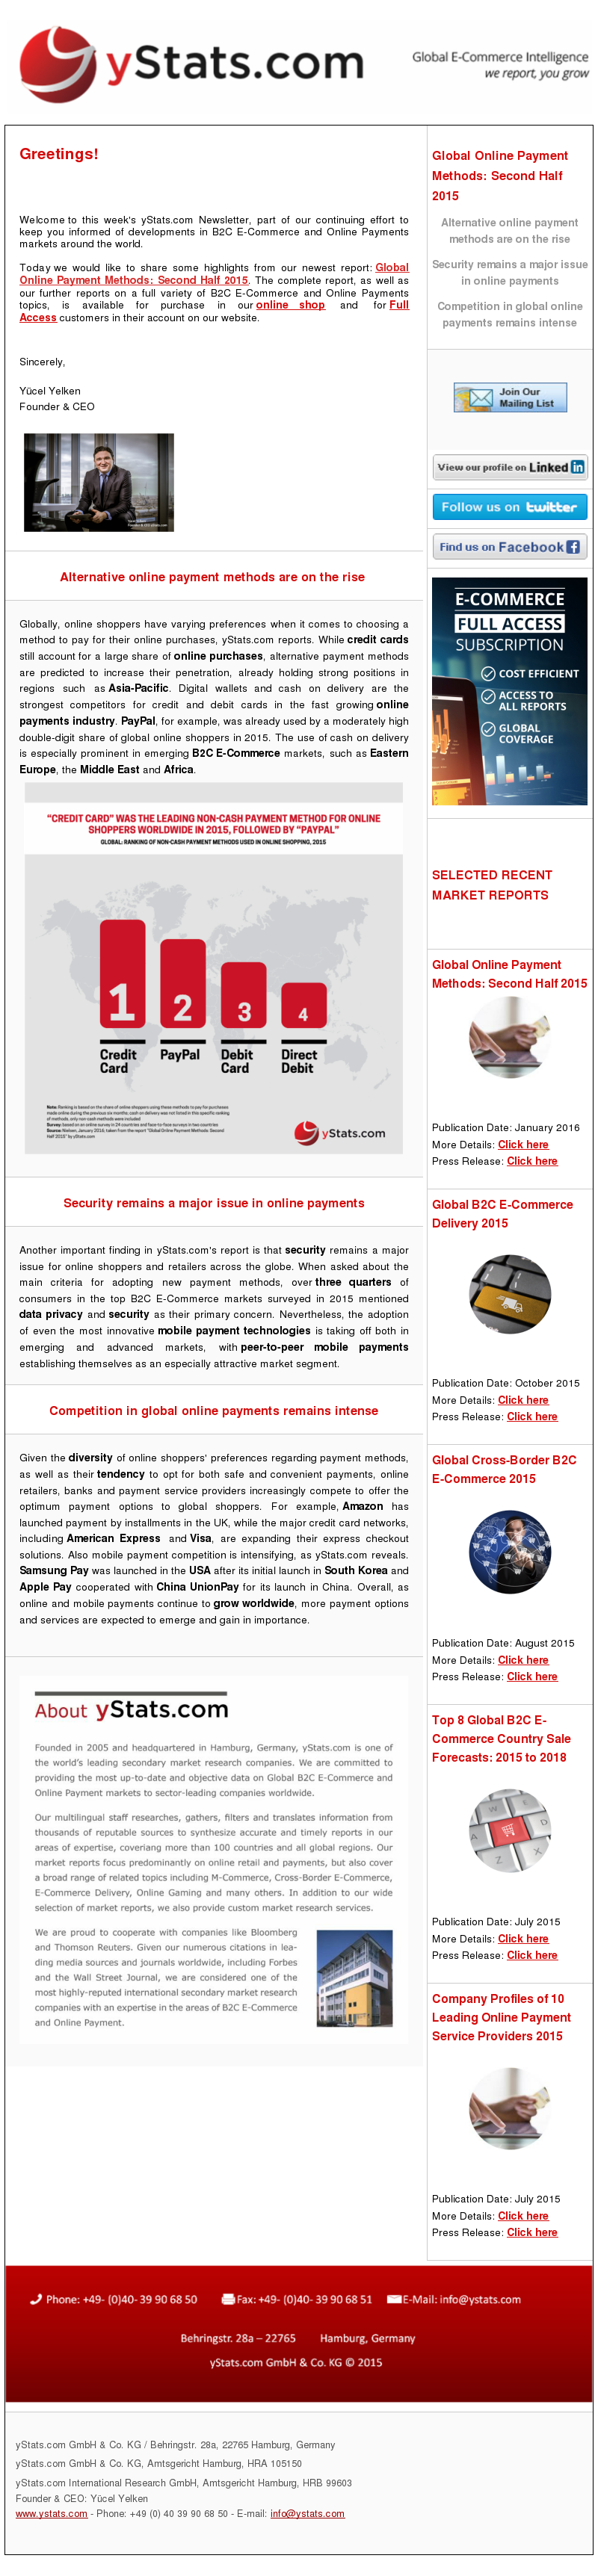 yStats.com Newsletter , 2016 , global online shoppers , emerging markets , online shoppers , Online payment methods worldwide , Paypal , Asia-Pacific , Samsung Pay , Apple Pay , Online retailers , online shoppers payment method preferences , alternative payment methods , security , data privacy , payment providers , non-cash payment methods , South Korea , cash on delivery , B2C E-Commerce markets growth , smartphone wallets , mobile money , Asia-pacific online payment landscape , credit card , debit cards , cash on delivery , mobile payments , China , USA Global online shoppers differ when it comes to choosing a method to pay for their online purchases, yStats.com reports. While credit cards still account for a large share of online purchases, alternative payment methods are predicted to increase their penetration, already holding strong positions in regions such as Asia-Pacific. Digital wallets and cash on delivery are the strongest competitors for credit and debit cards in the fast growing online payments industry. PayPal, for example, was already used by a moderately high double-digit share of global online shoppers in 2015. The use of cash on delivery is especially prominent in emerging B2C E-Commerce markets, such as Eastern Europe, the Middle East and Africa.

Another important finding in yStats.com’s report is that security remains a major issue for online shoppers and retailers across the globe. When asked about the main criteria for adopting new payment methods, over three quarters of consumers in the top B2C E-Commerce markets surveyed in 2015 mentioned data privacy and security as their primary concern. Nevertheless, the adoption of even the most innovative mobile payment technologies is taking off both in emerging and advanced markets, with peer-to-peer mobile payments establishing themselves as an especially attractive market segment.

Given the diversity of online shoppers’ preferences regarding payment methods, as well as their tendency to opt for both safe and convenient payments, online retailers, banks and payment service providers increasingly compete to offer the best payment options to global shoppers. For example, Amazon has launched payment by installments in the UK, while the major credit card networks, including American Express and Visa, are expanding their express checkout solutions. Also in mobile payments completion intensifies, as yStats.com reveals. Samsung Pay was launched in the USA after its initial launch in South Korea and Apple Pay cooperated with China UnionPay for its launch in China. Overall, as online and mobile payments continue to grow worldwide, more payment options and services are expected to emerge and gain in importance.